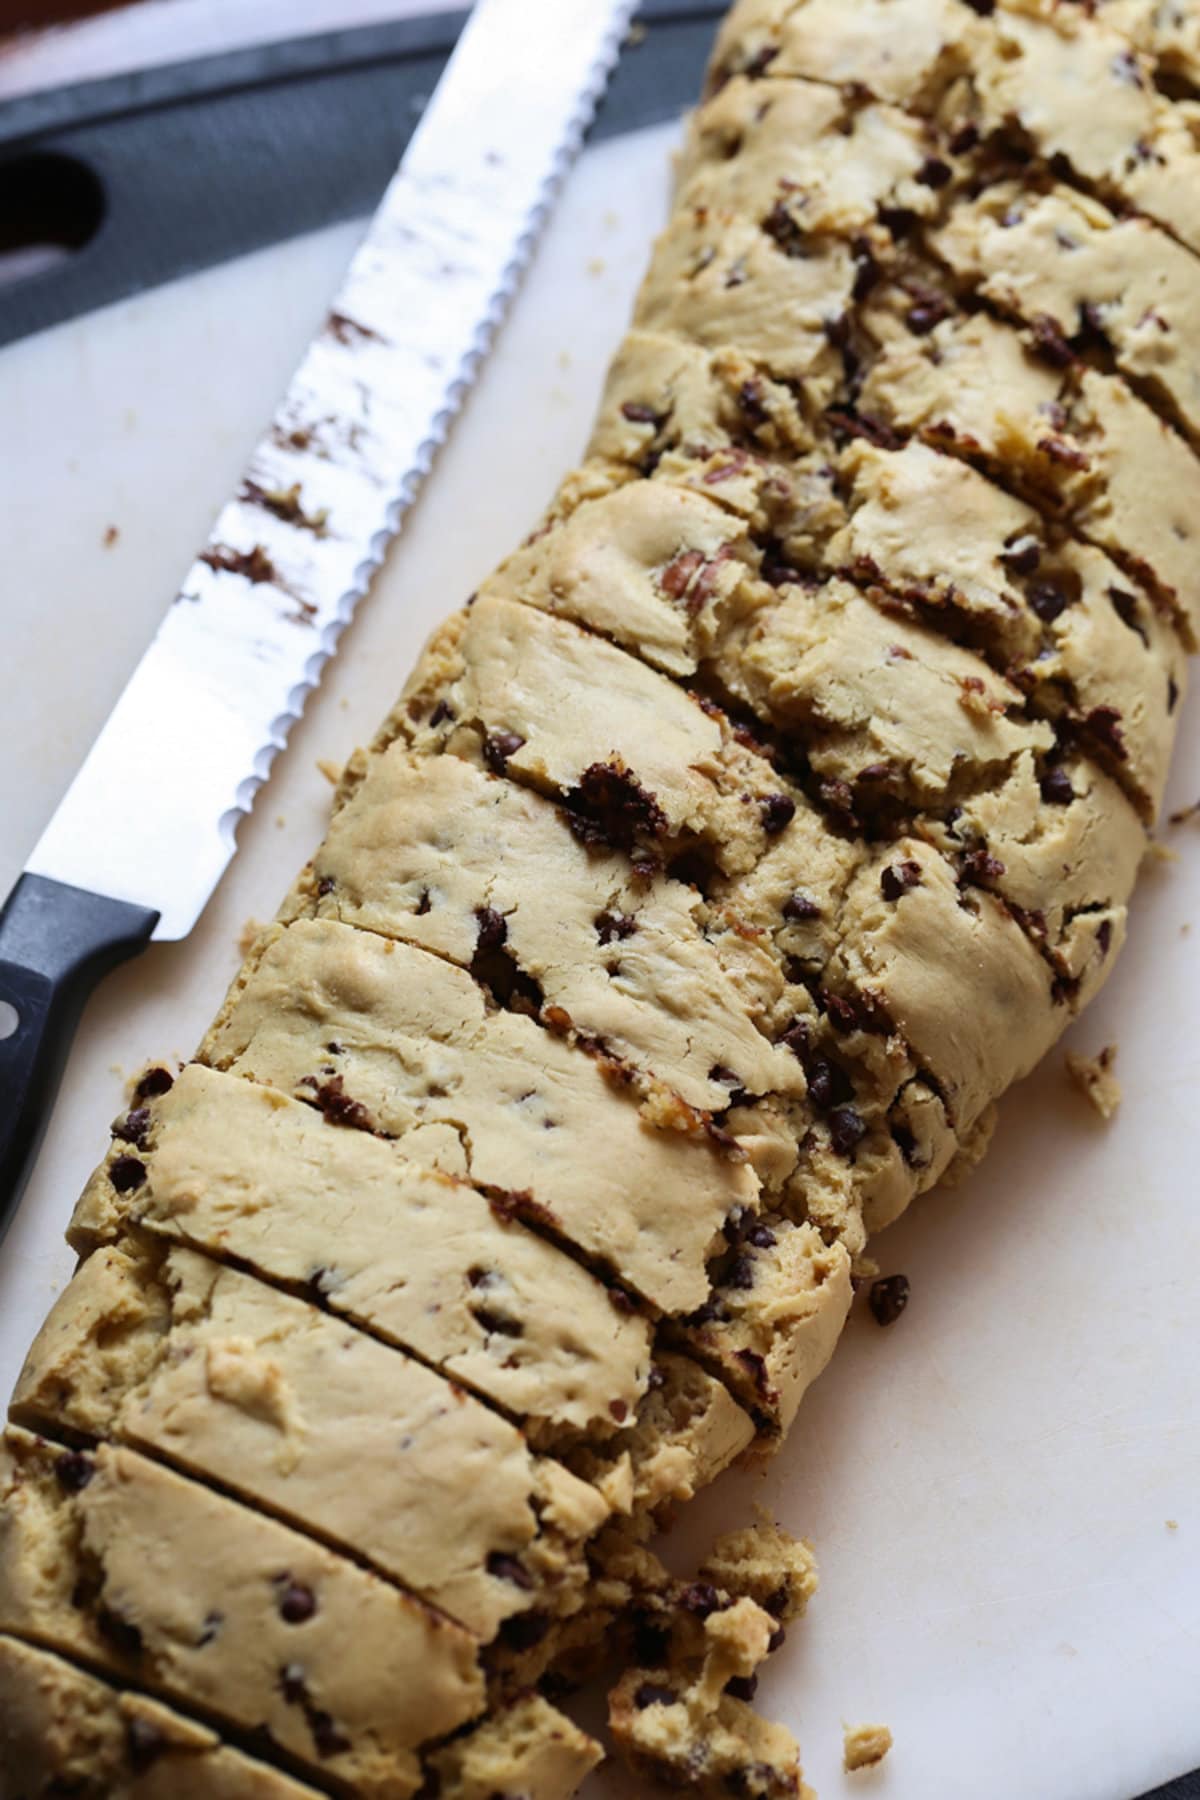 A log of dough sliced into pieces with a serrated knife in the process of making biscotti using a cake mix